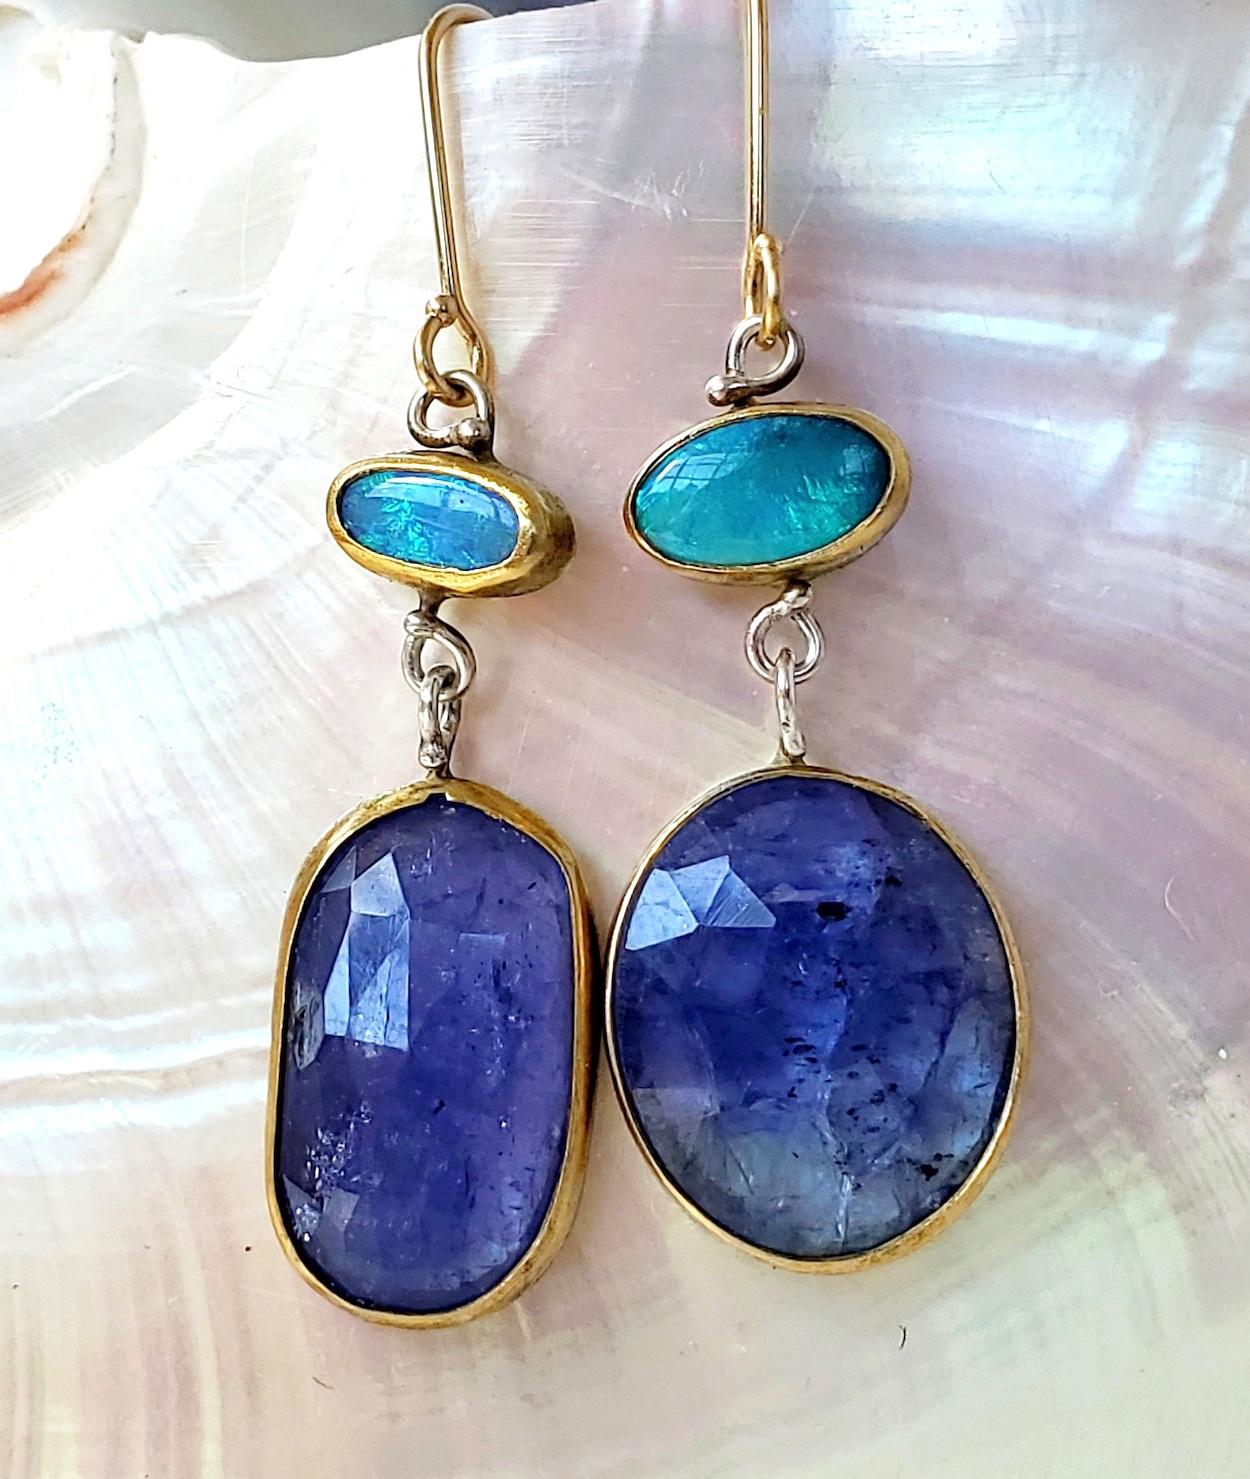 Mis matched Lightning Ridge opal earrings with rose cut tanzanite drops. Subtly distinct and different to make it interesting! All the gems are handset in 22K gold bezels and sterling silver backs (cut out on the back of the tanzanites to let the